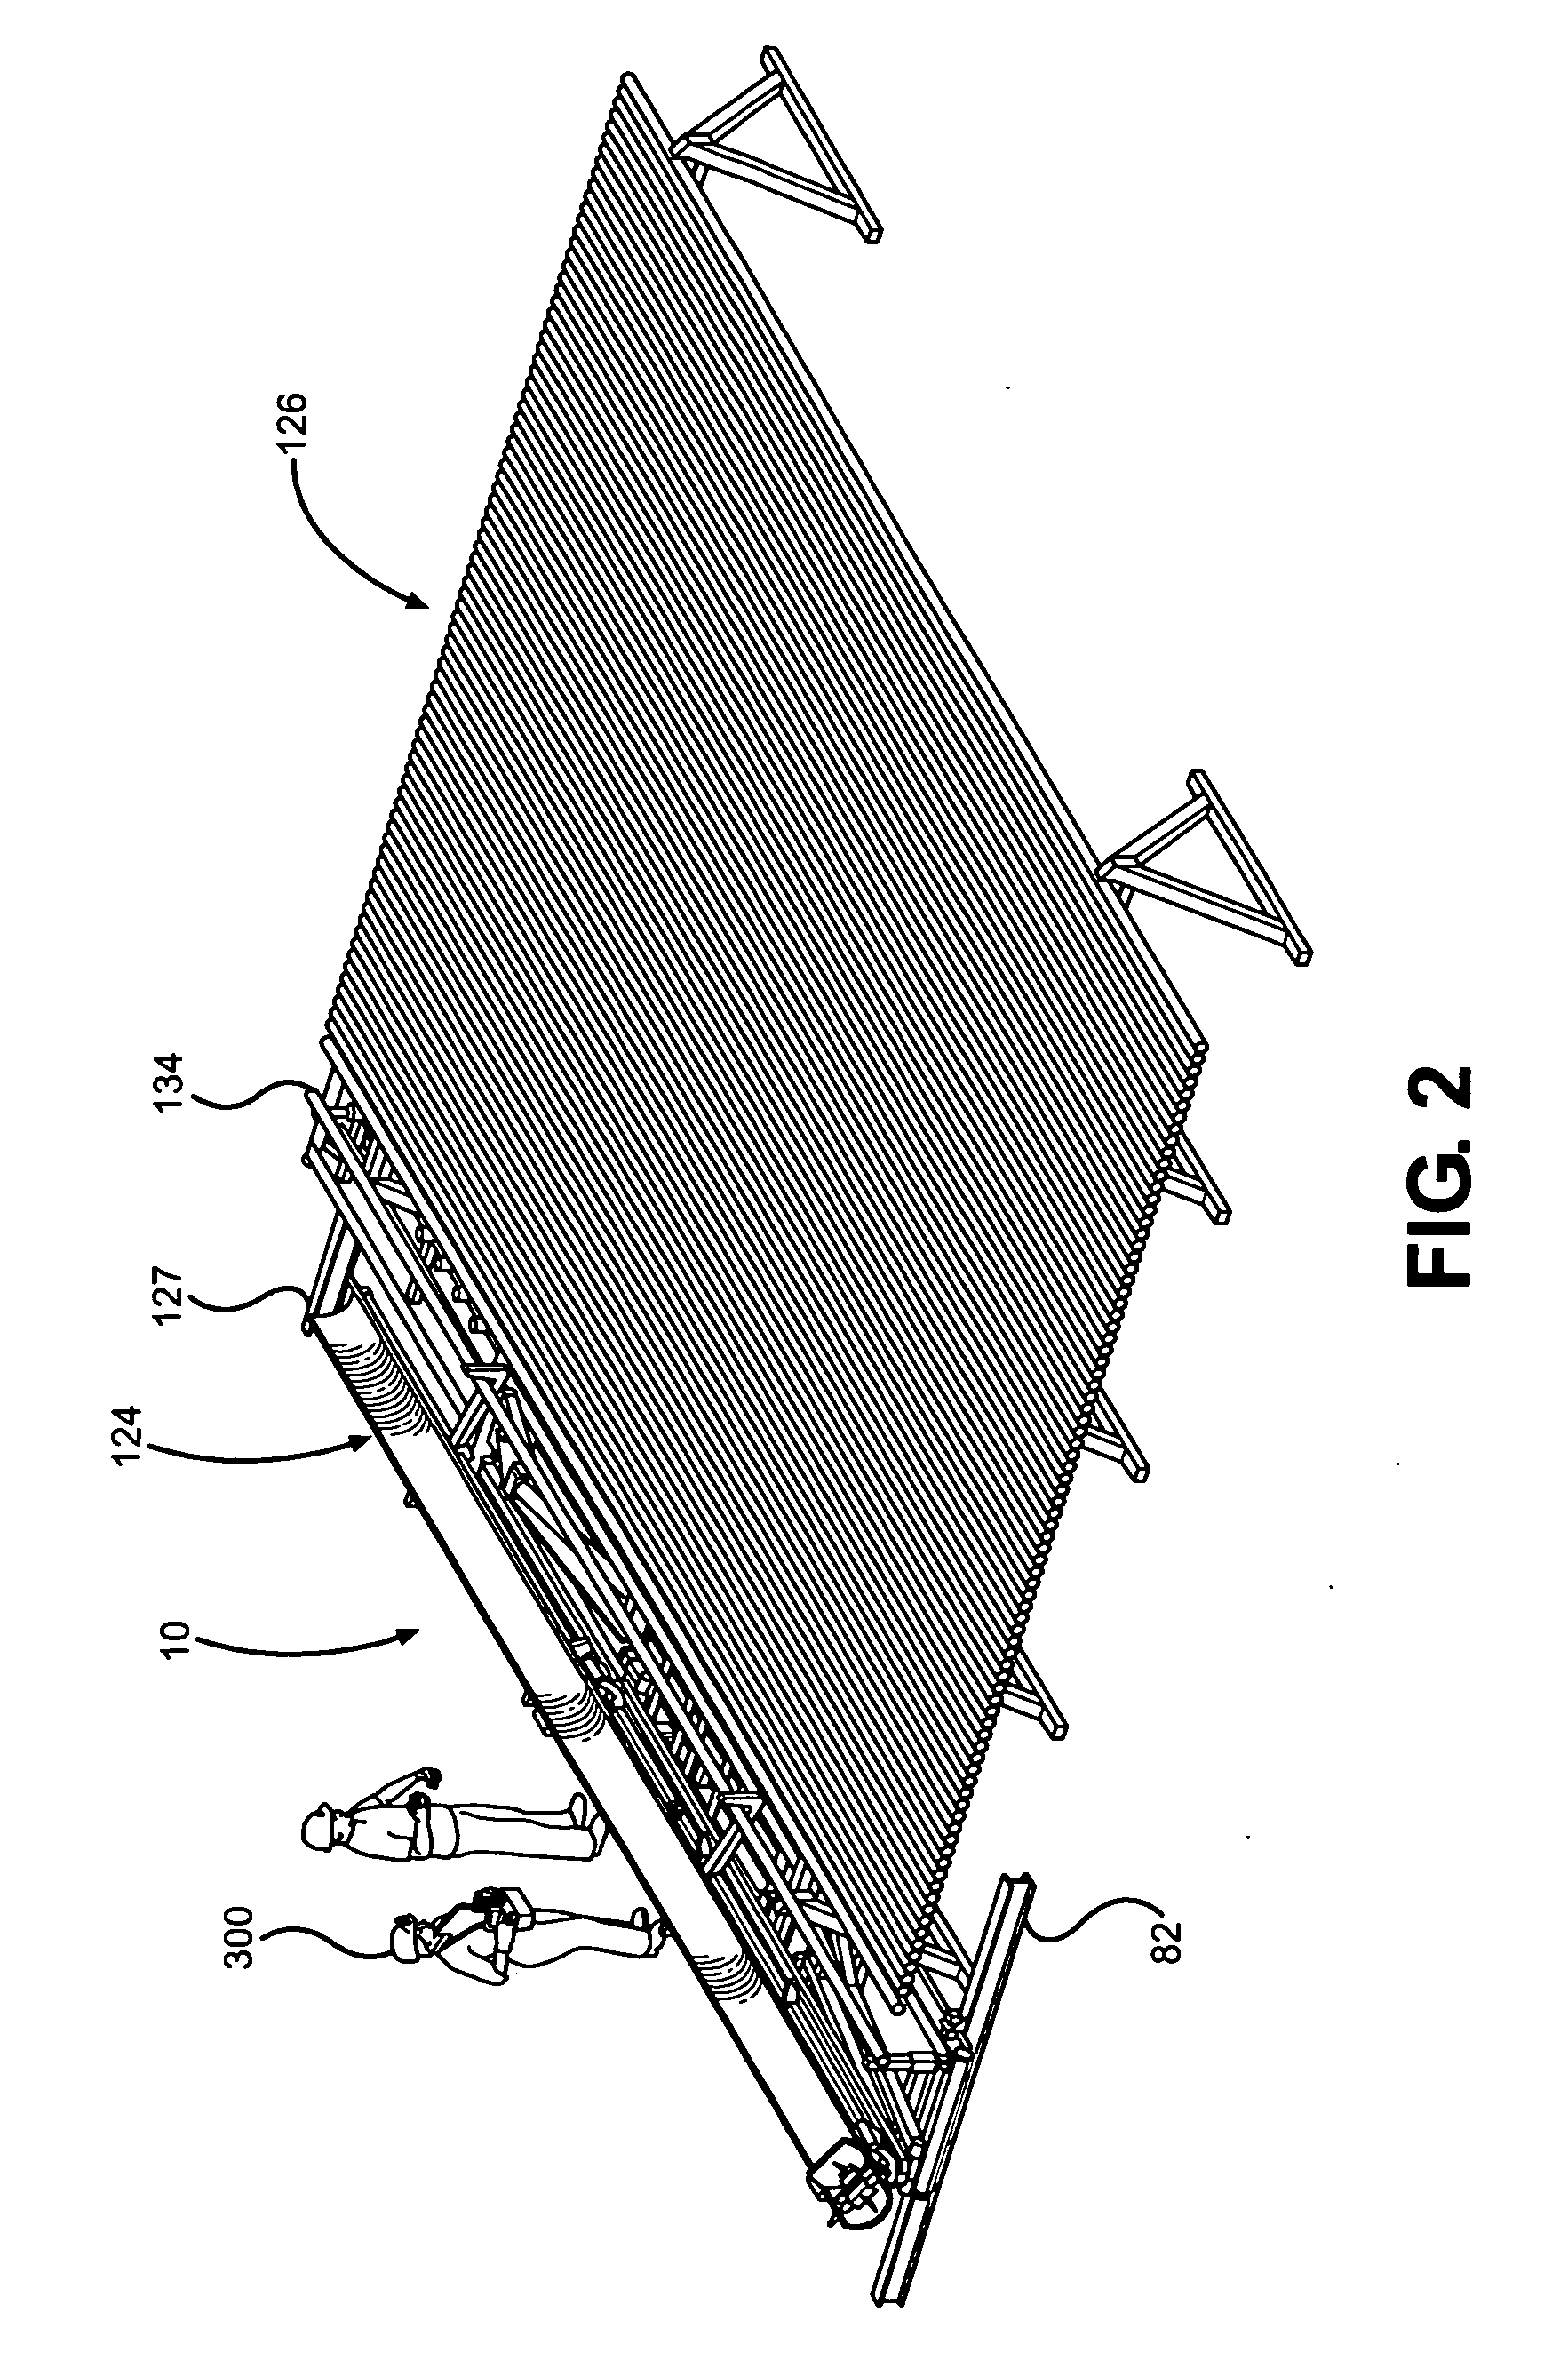 Pipe Handling Apparatus and Method